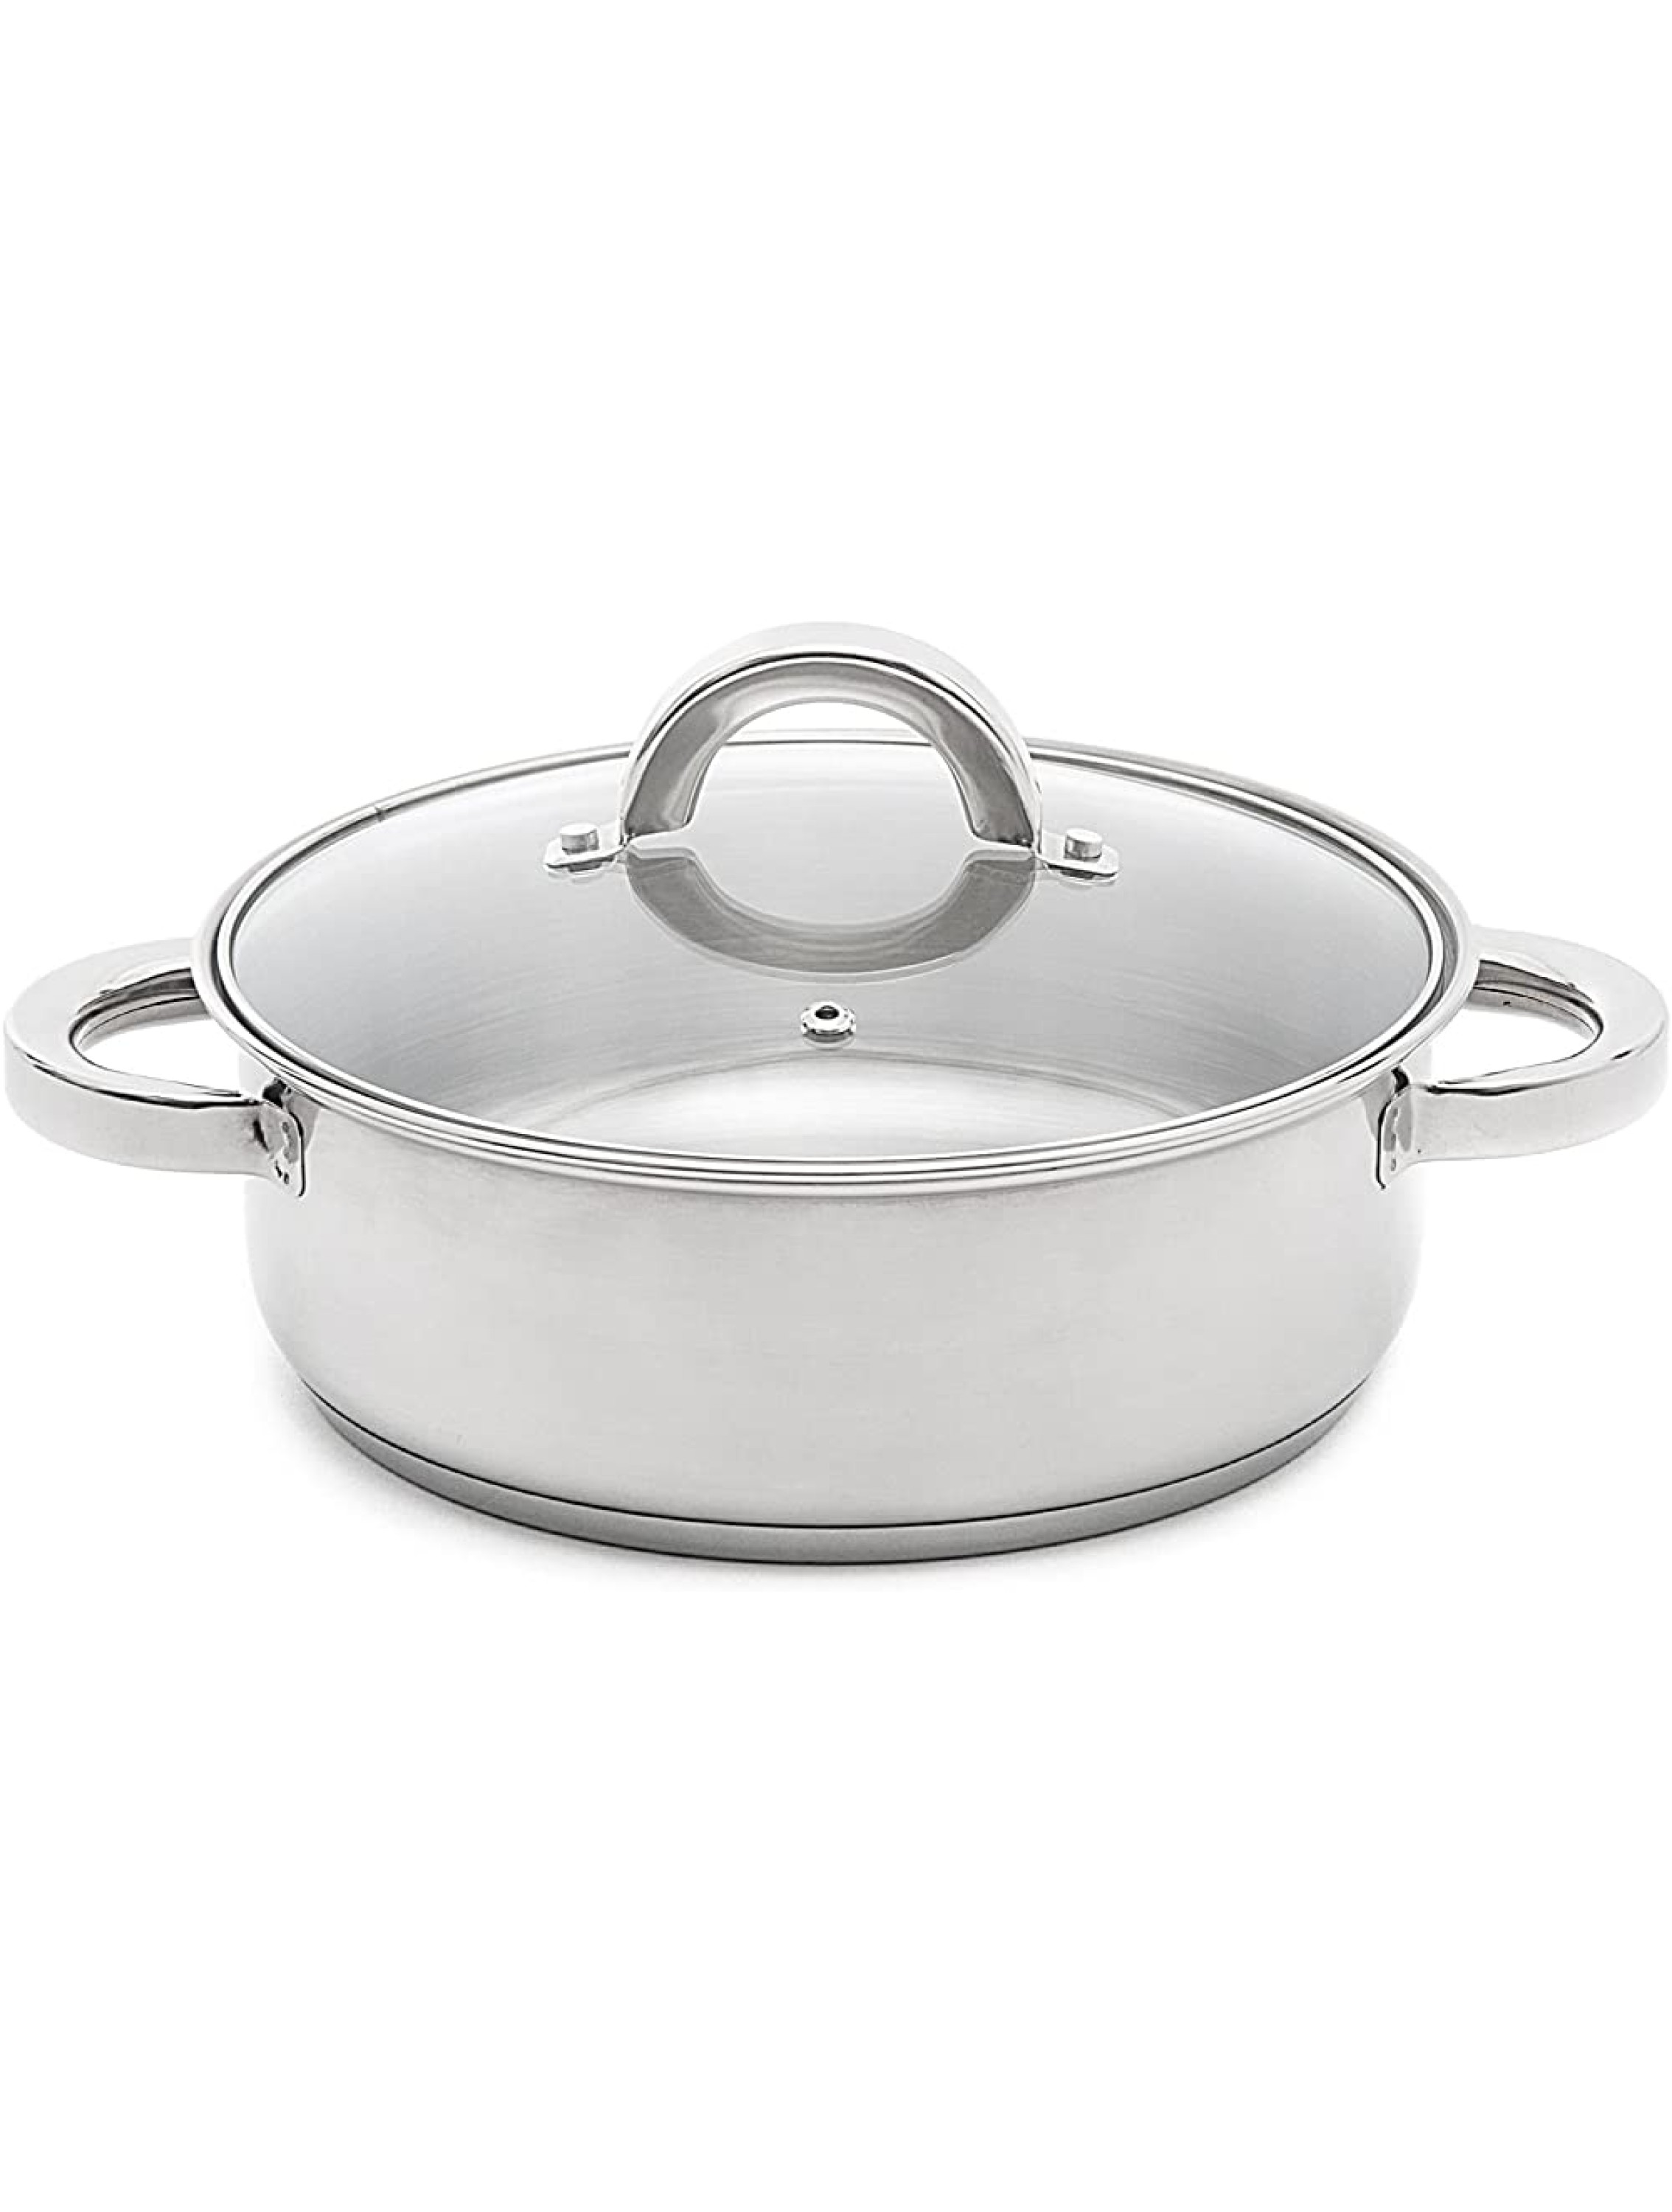 San Ignacio Caesa Casserole 24cm 4l 0,8mm Stainless Steel Suitable for Induction with lid Caesar - BRSNFD78N